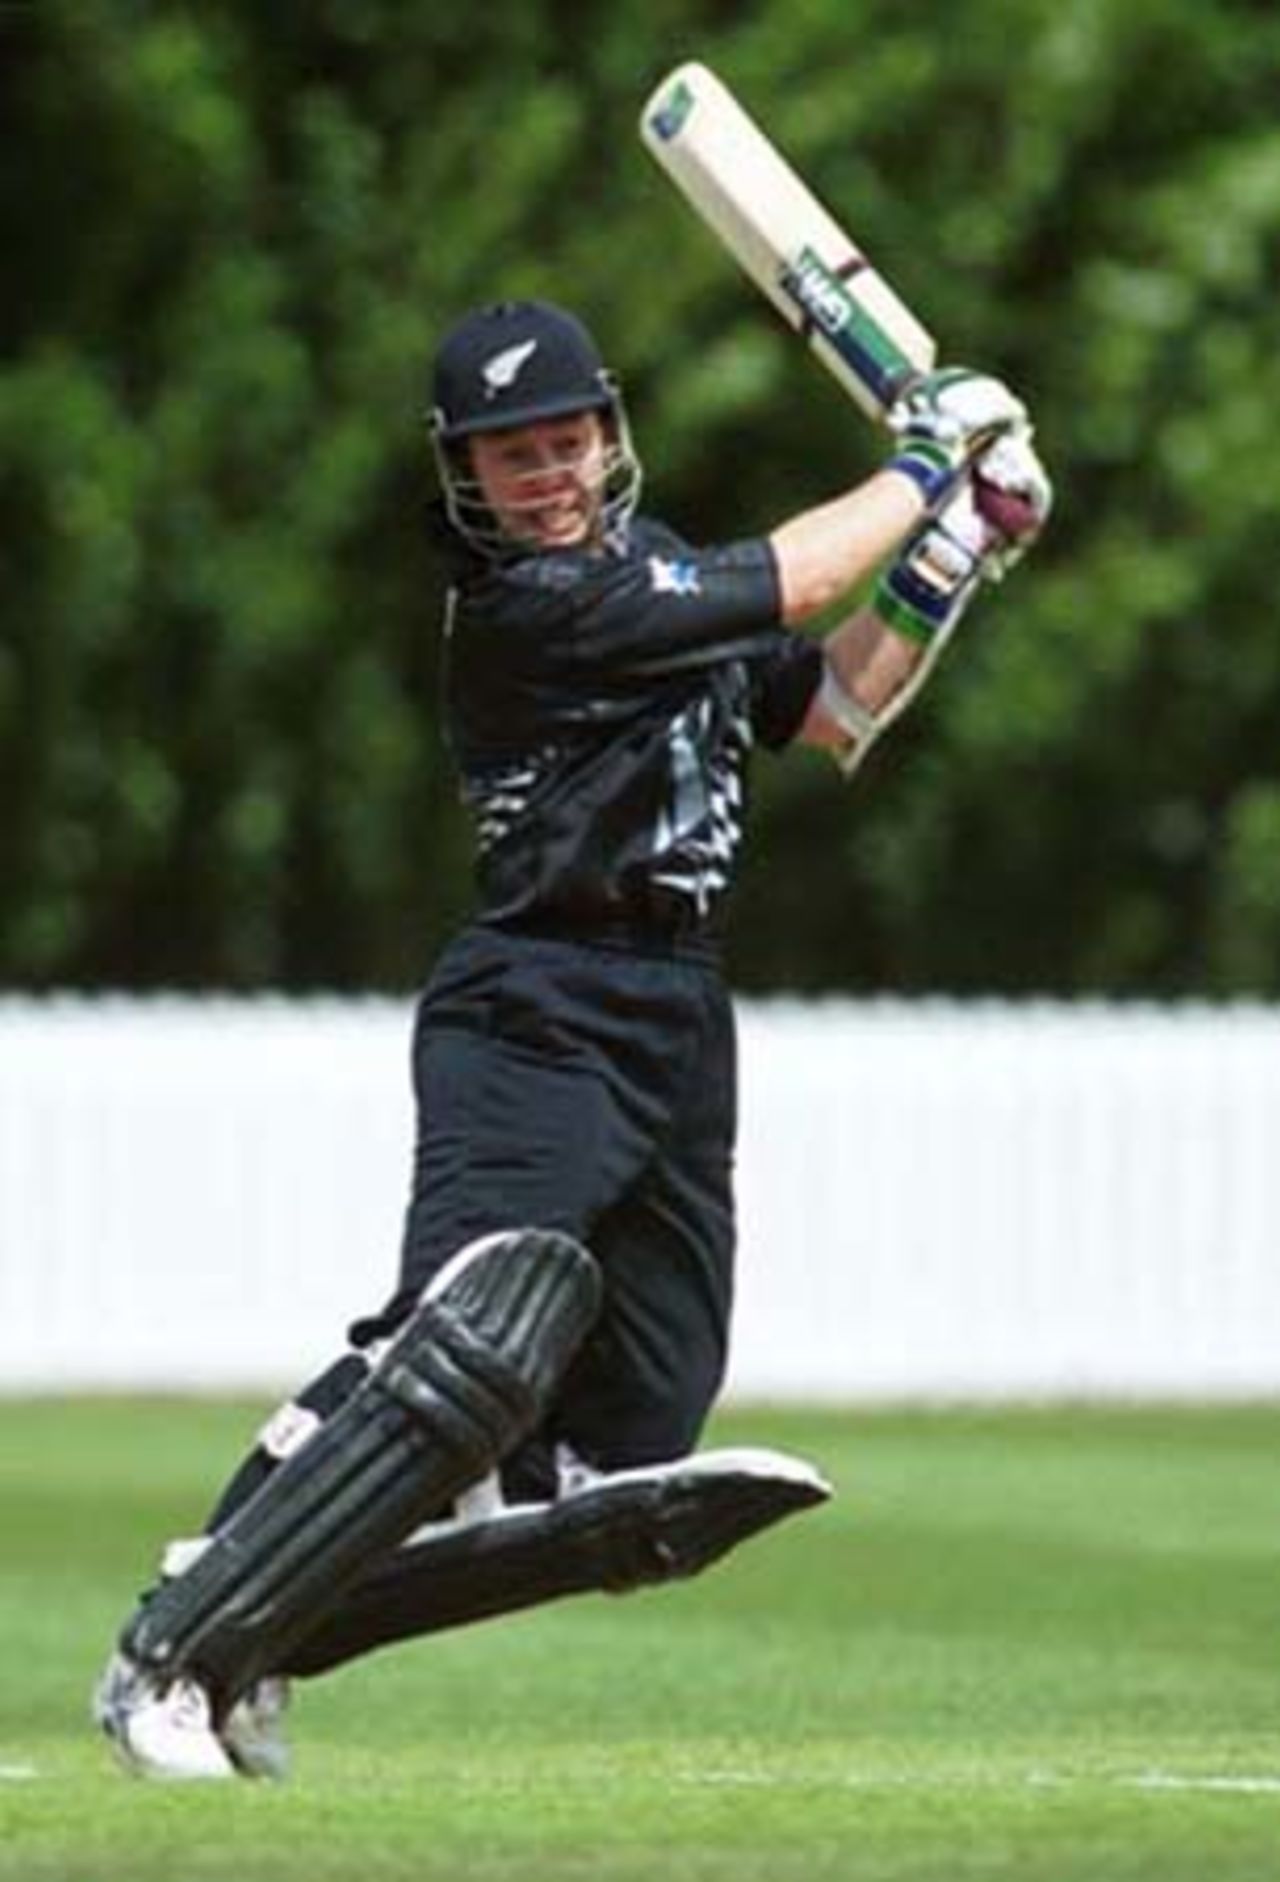 New Zealand v Sri Lanka in the 2000 CricInfo Women's World Cup, New Zealand at Lincoln Green